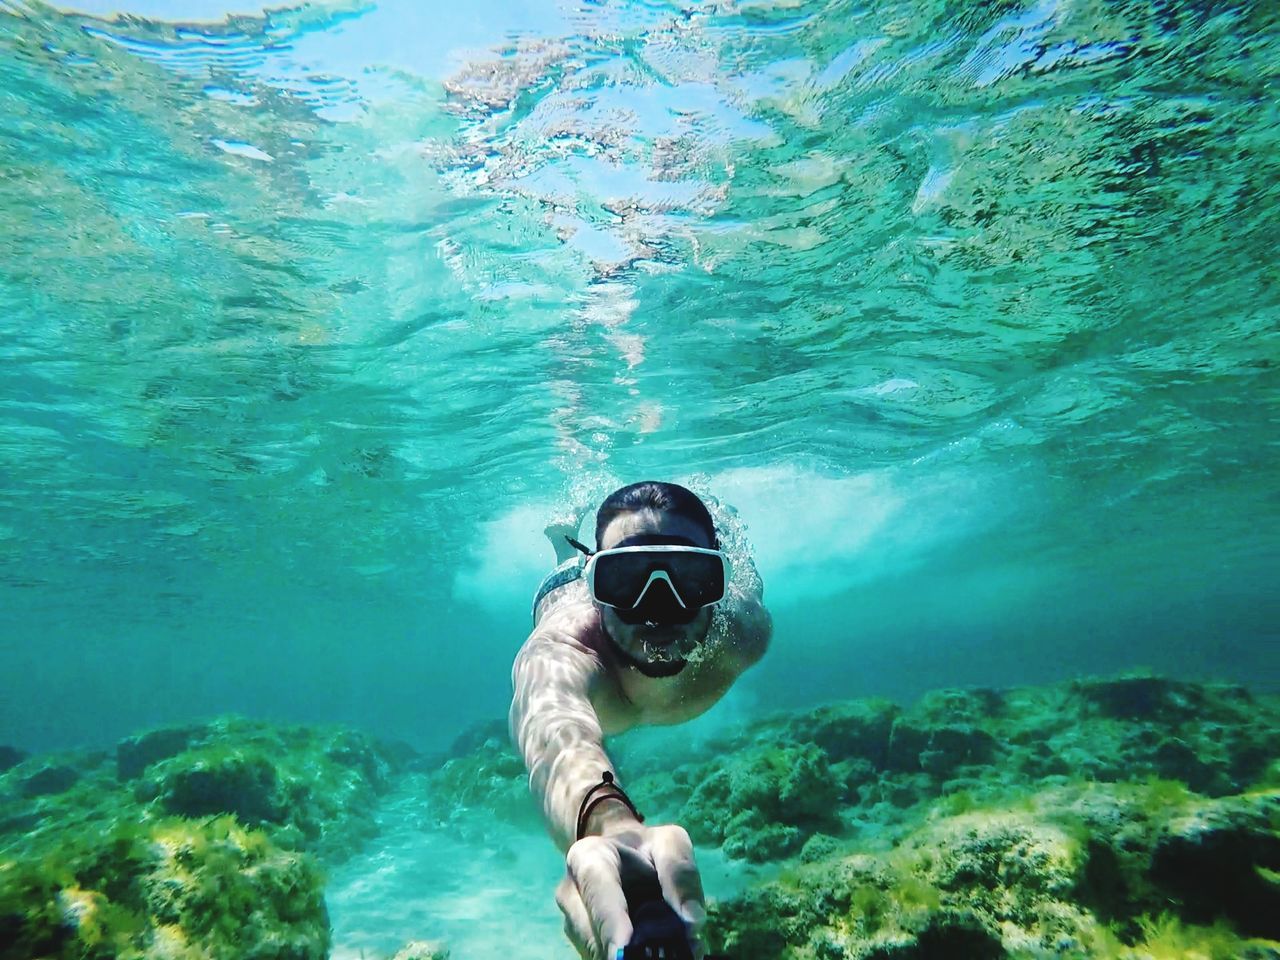 sea, water, underwater, swimming, undersea, one person, nature, real people, adventure, leisure activity, eyewear, portrait, lifestyles, exploration, snorkeling, day, aquatic sport, swimming goggles, outdoors, turquoise colored, underwater diving